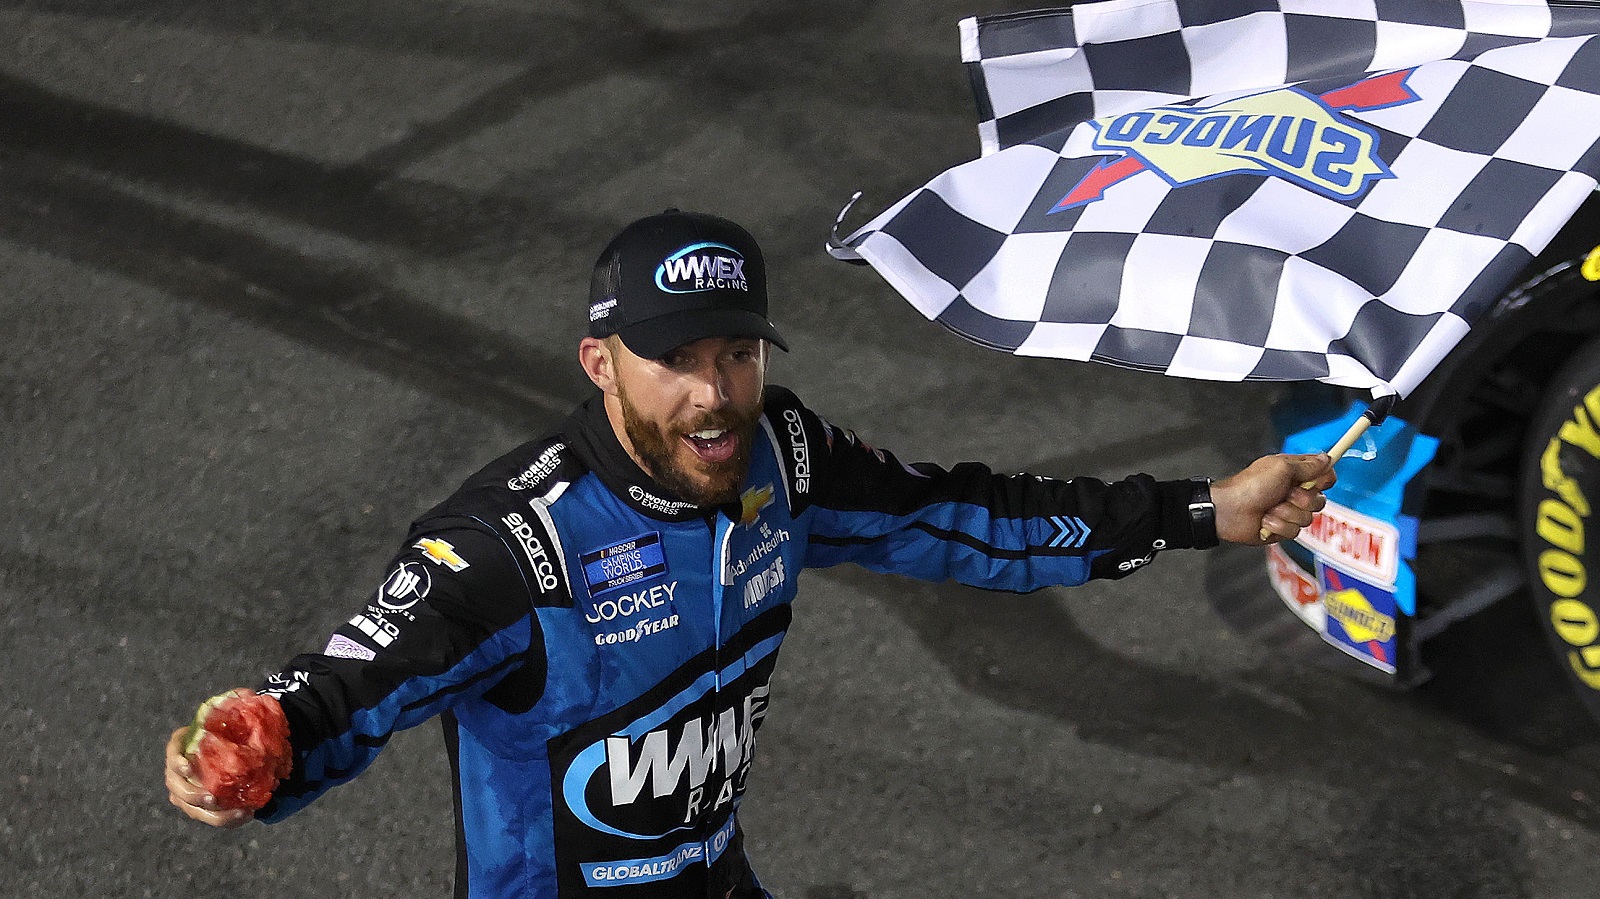 Ross Chastain celebrates with the checkered flag after winning the NASCAR Camping World Truck Series North Carolina Education Lottery 200 at Charlotte Motor Speedway on May 27, 2022.